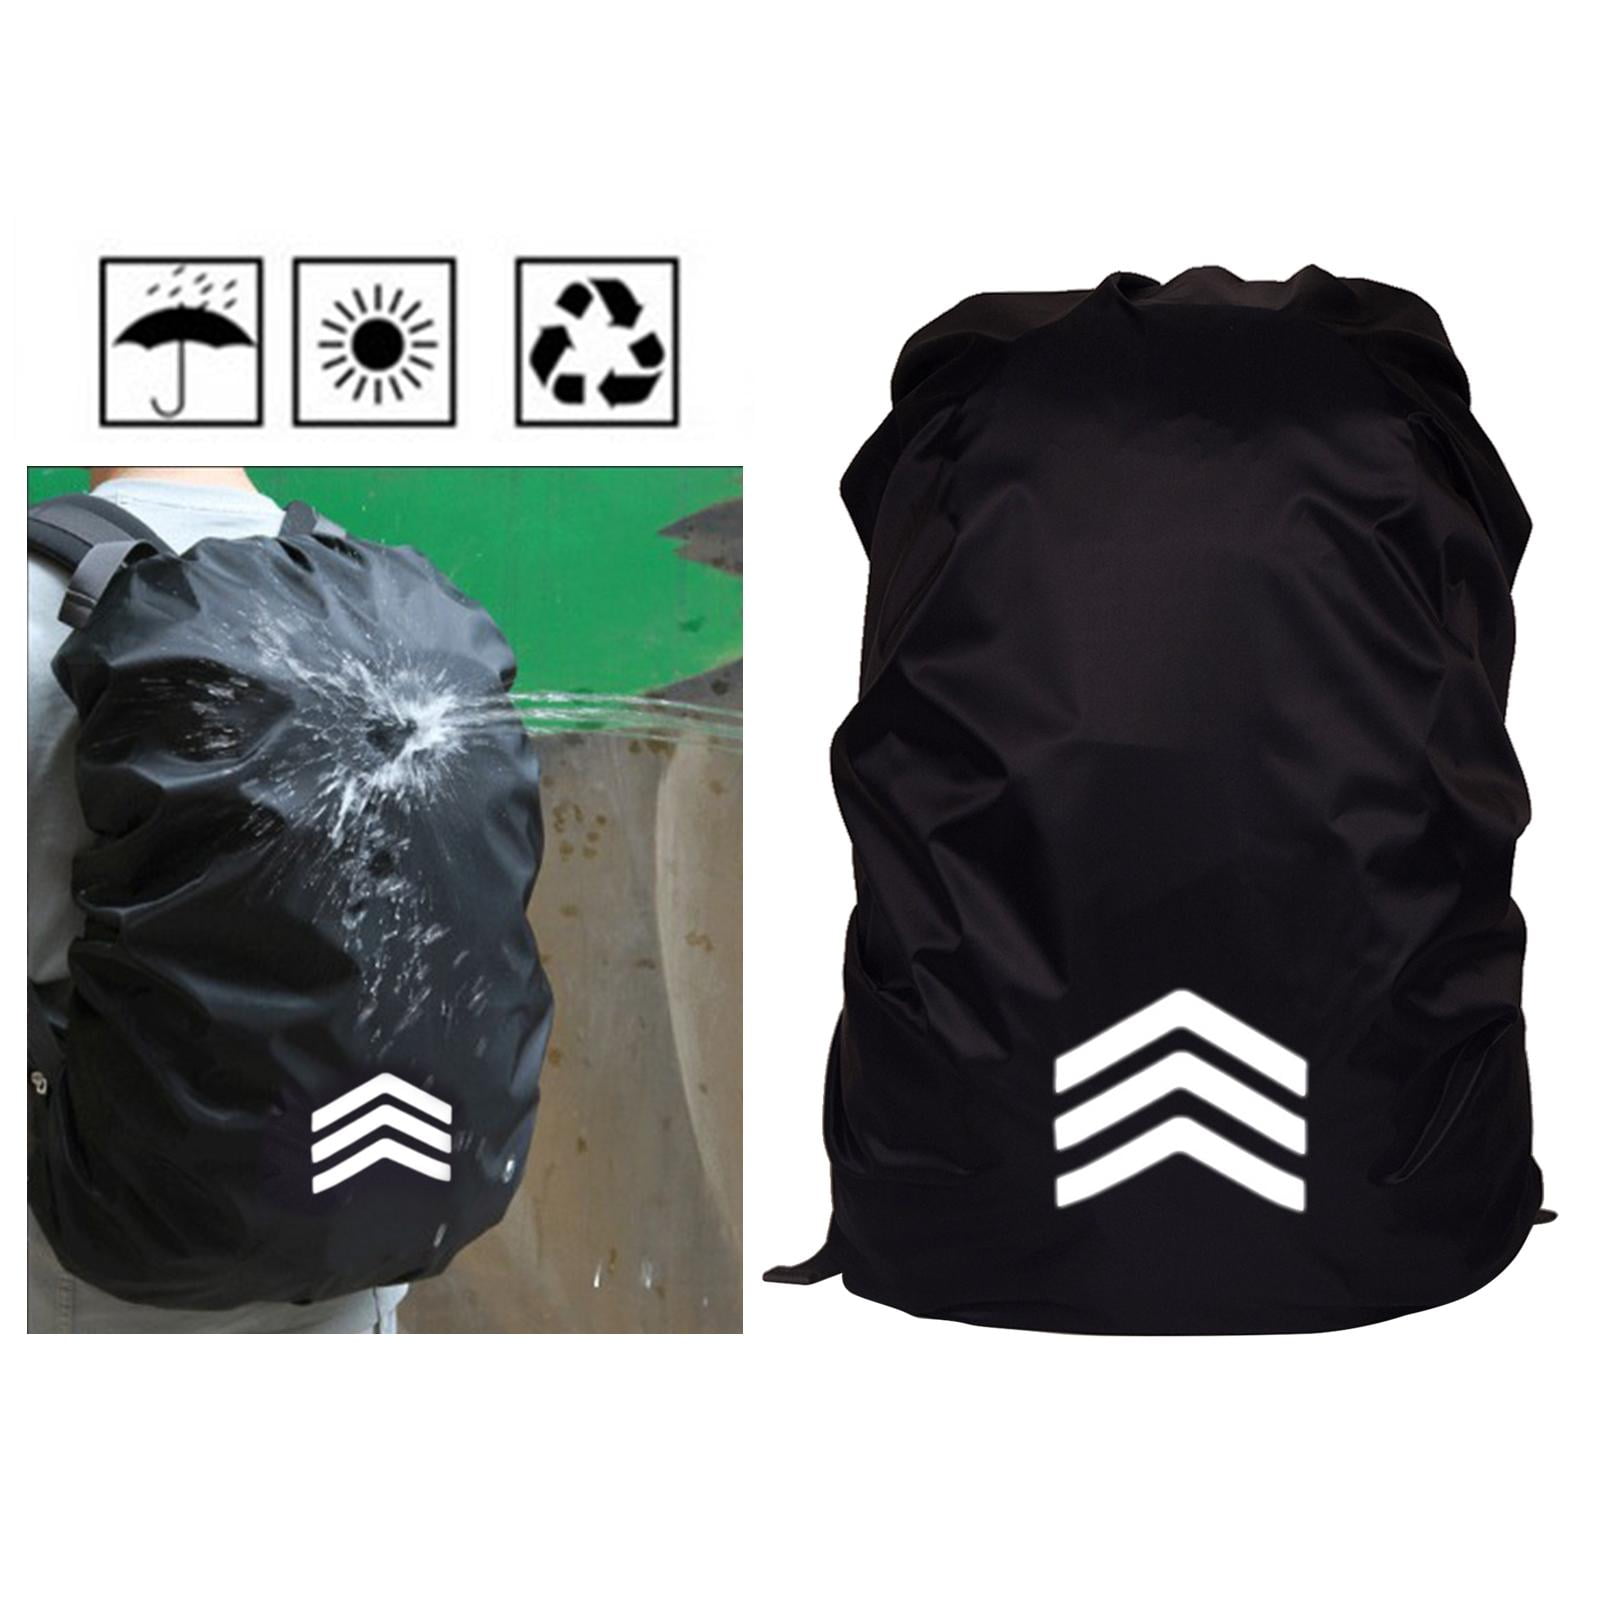 Outdoor Reflective Backpack Cover Bag Cover Rain Dustproof Waterproof Cov,X 